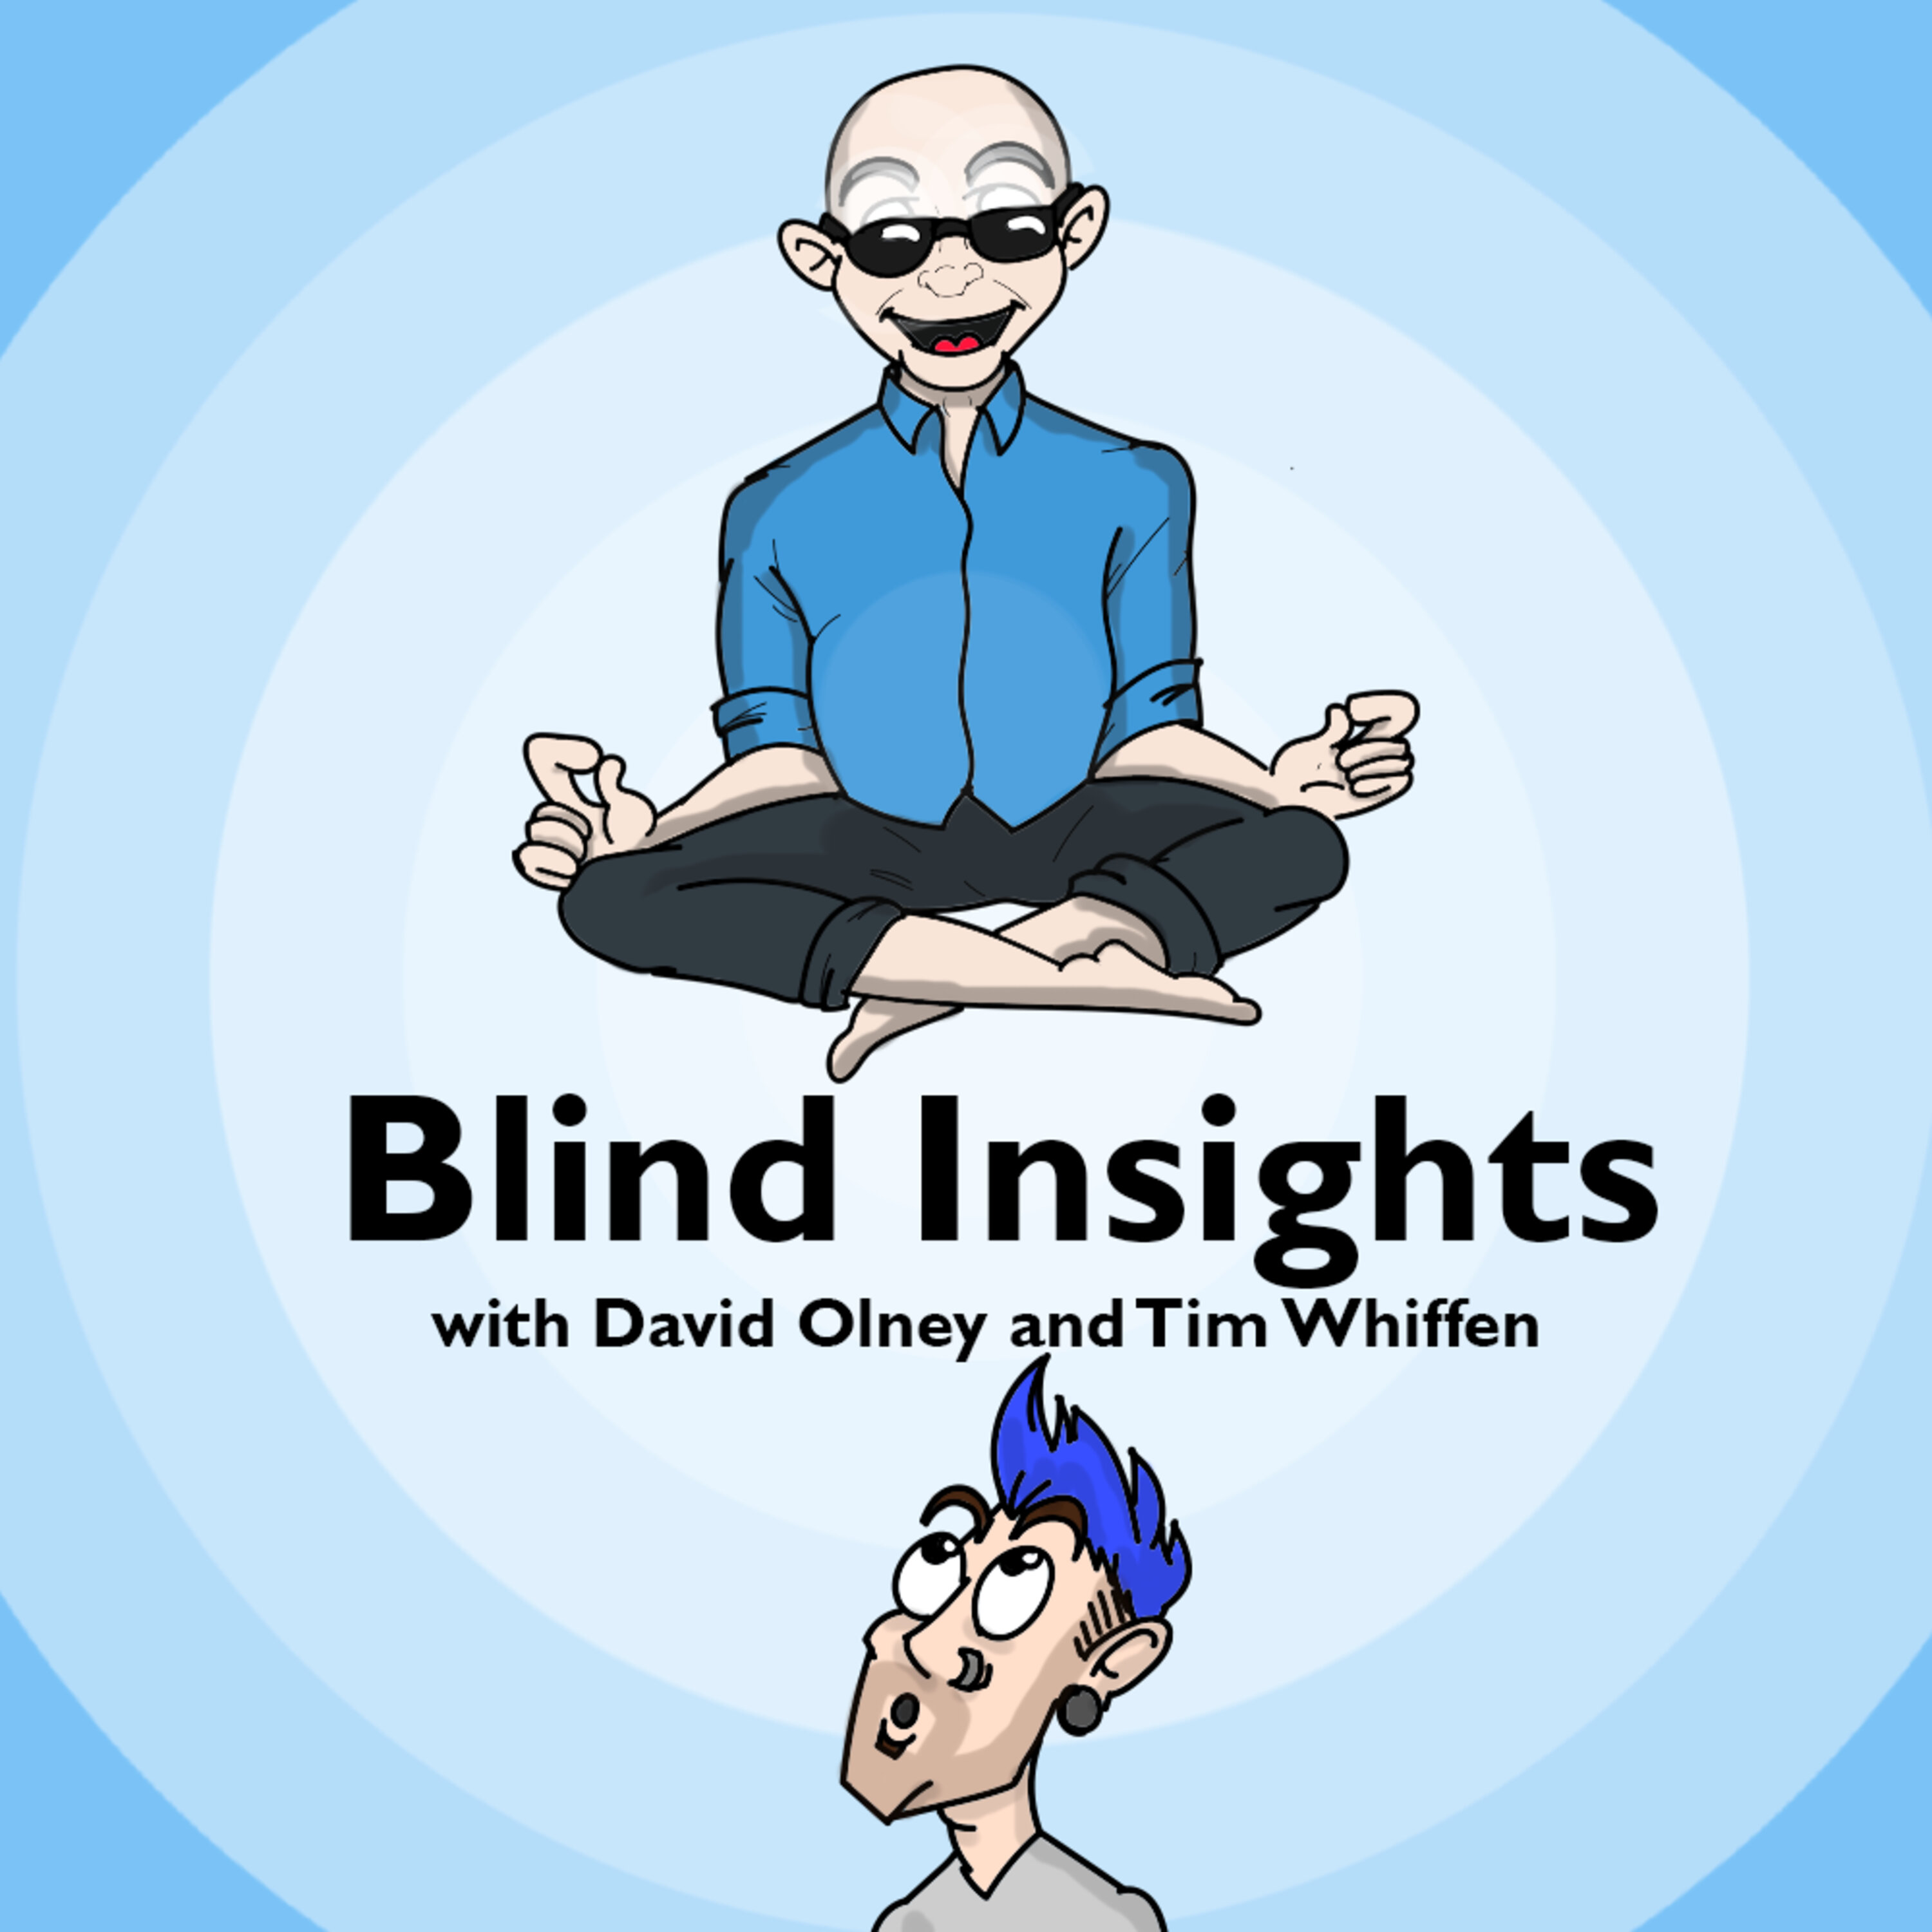 Blind Insights - Being Social on Social Media (Special Guest Chloe Grayling)